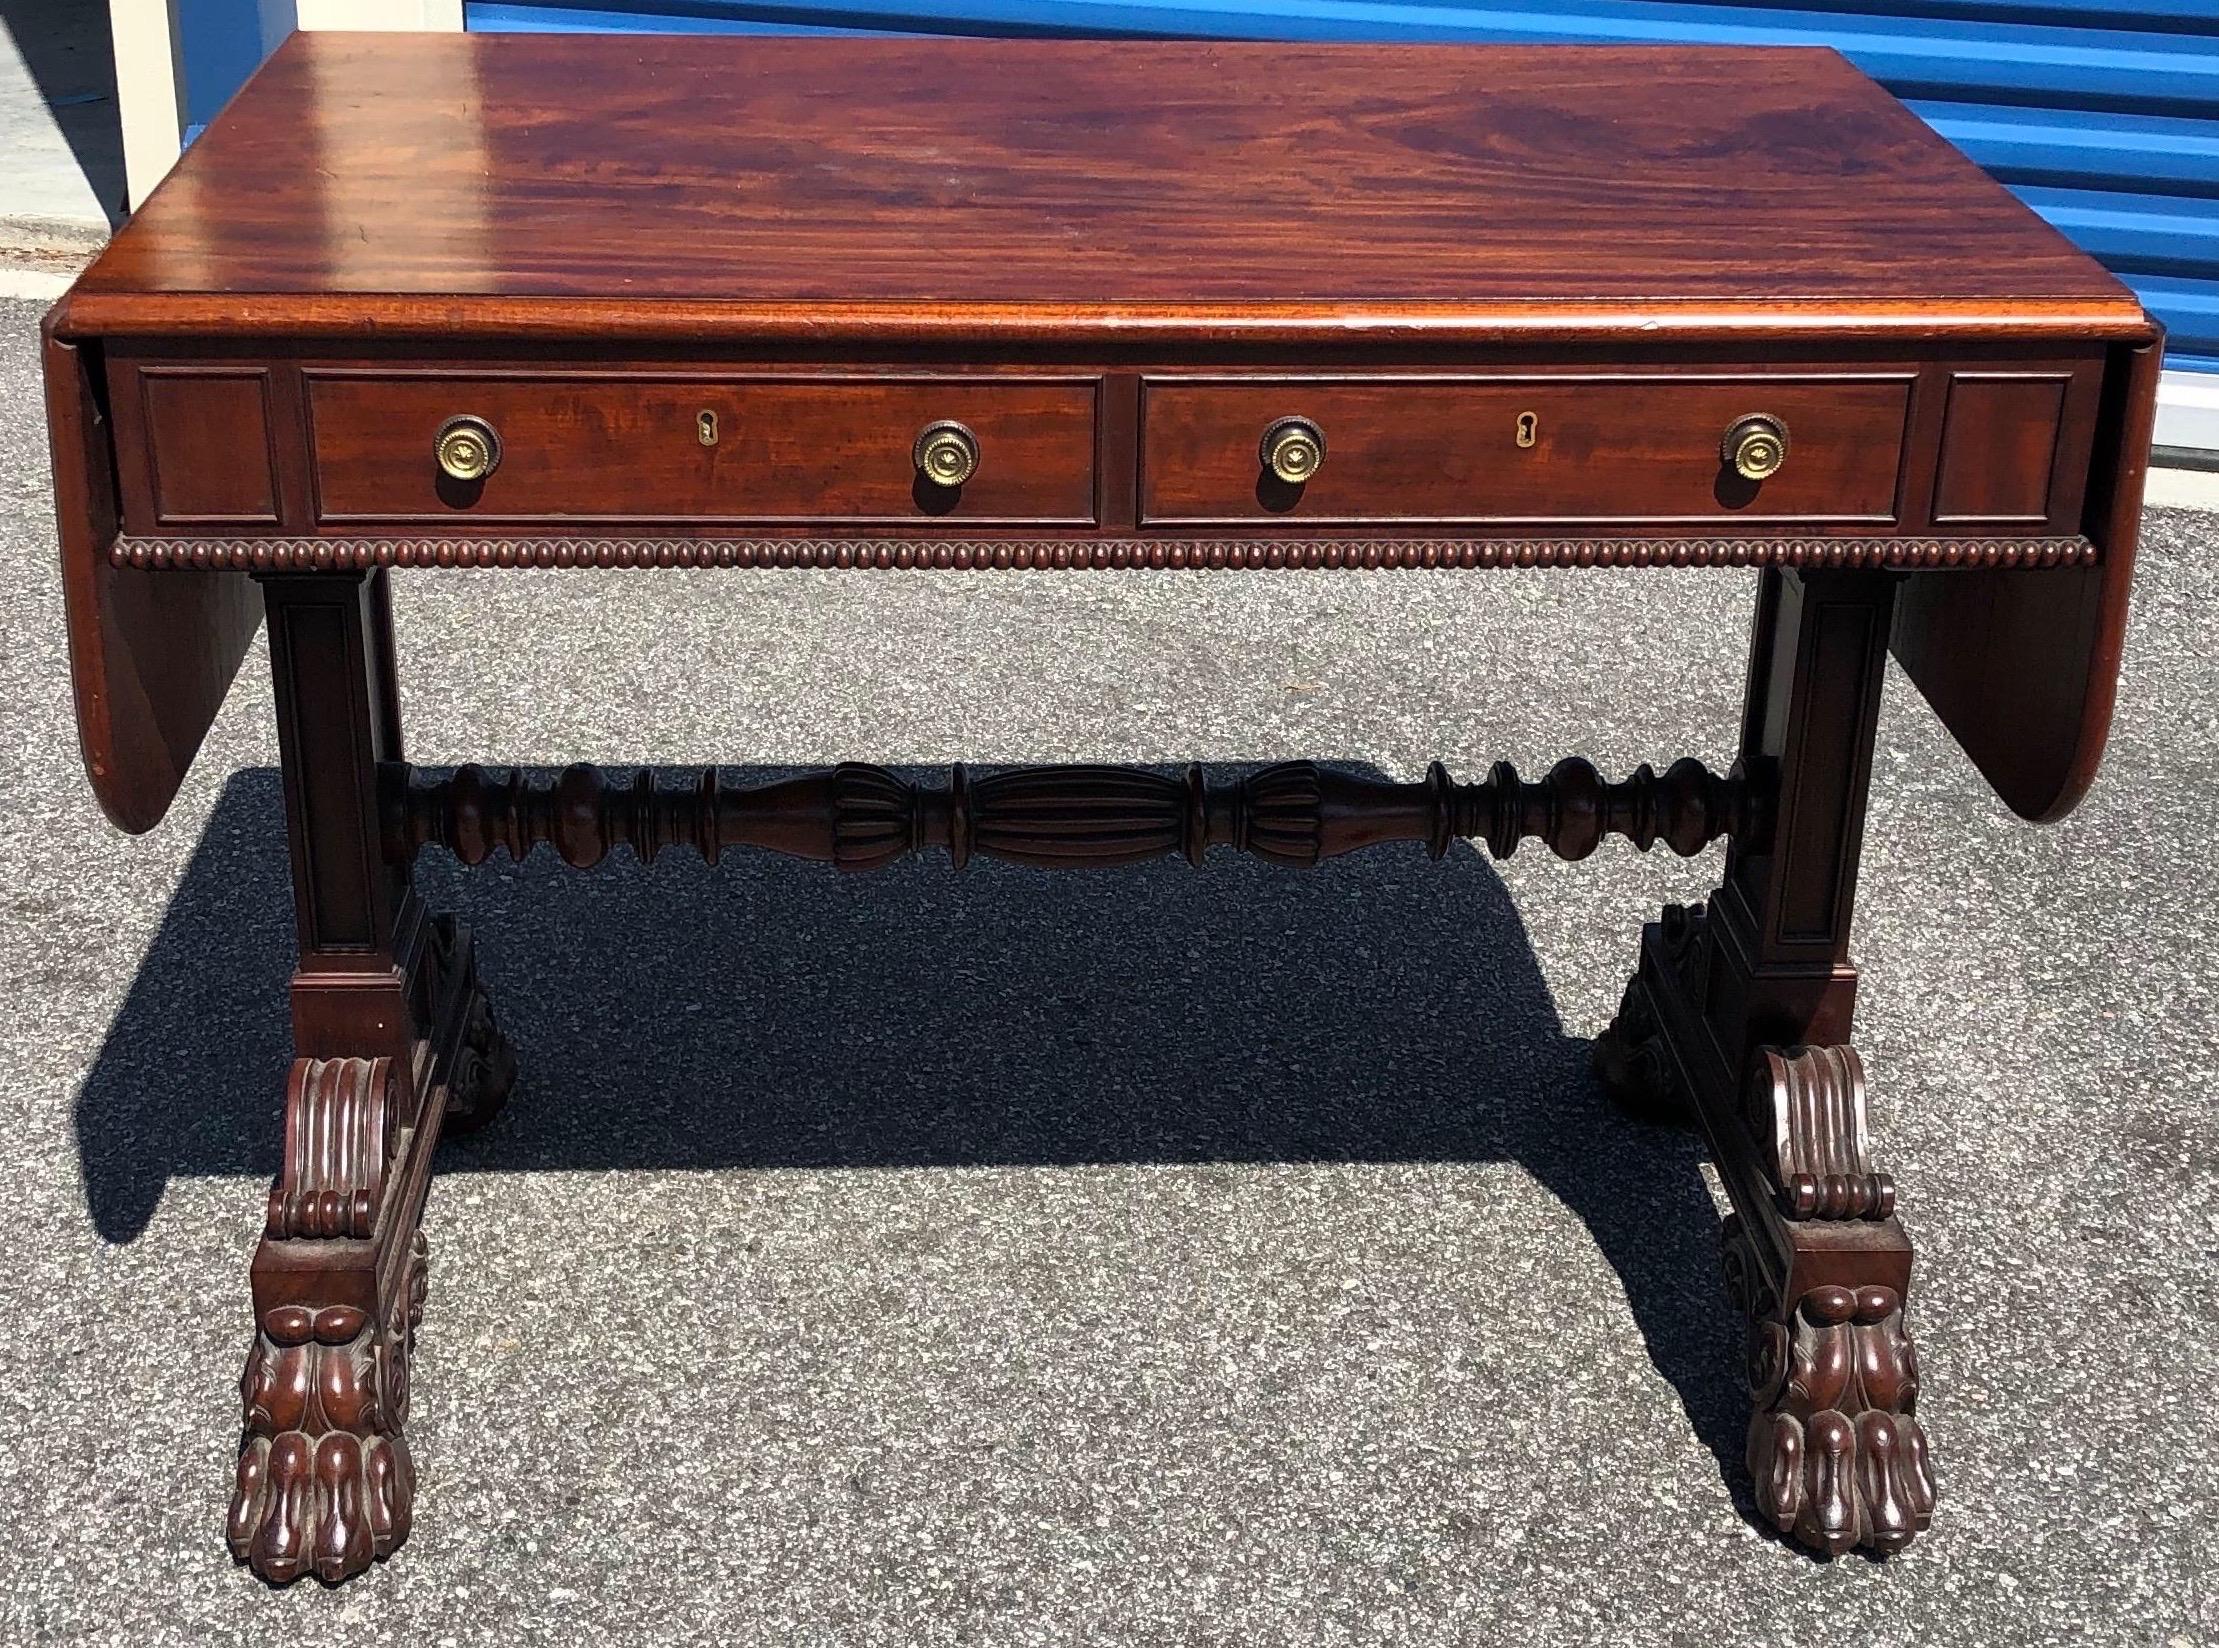 Fine 19th century English Regency mahogany sofa table by Gillows.  Incredible quality carving, color and size on this table stamped 